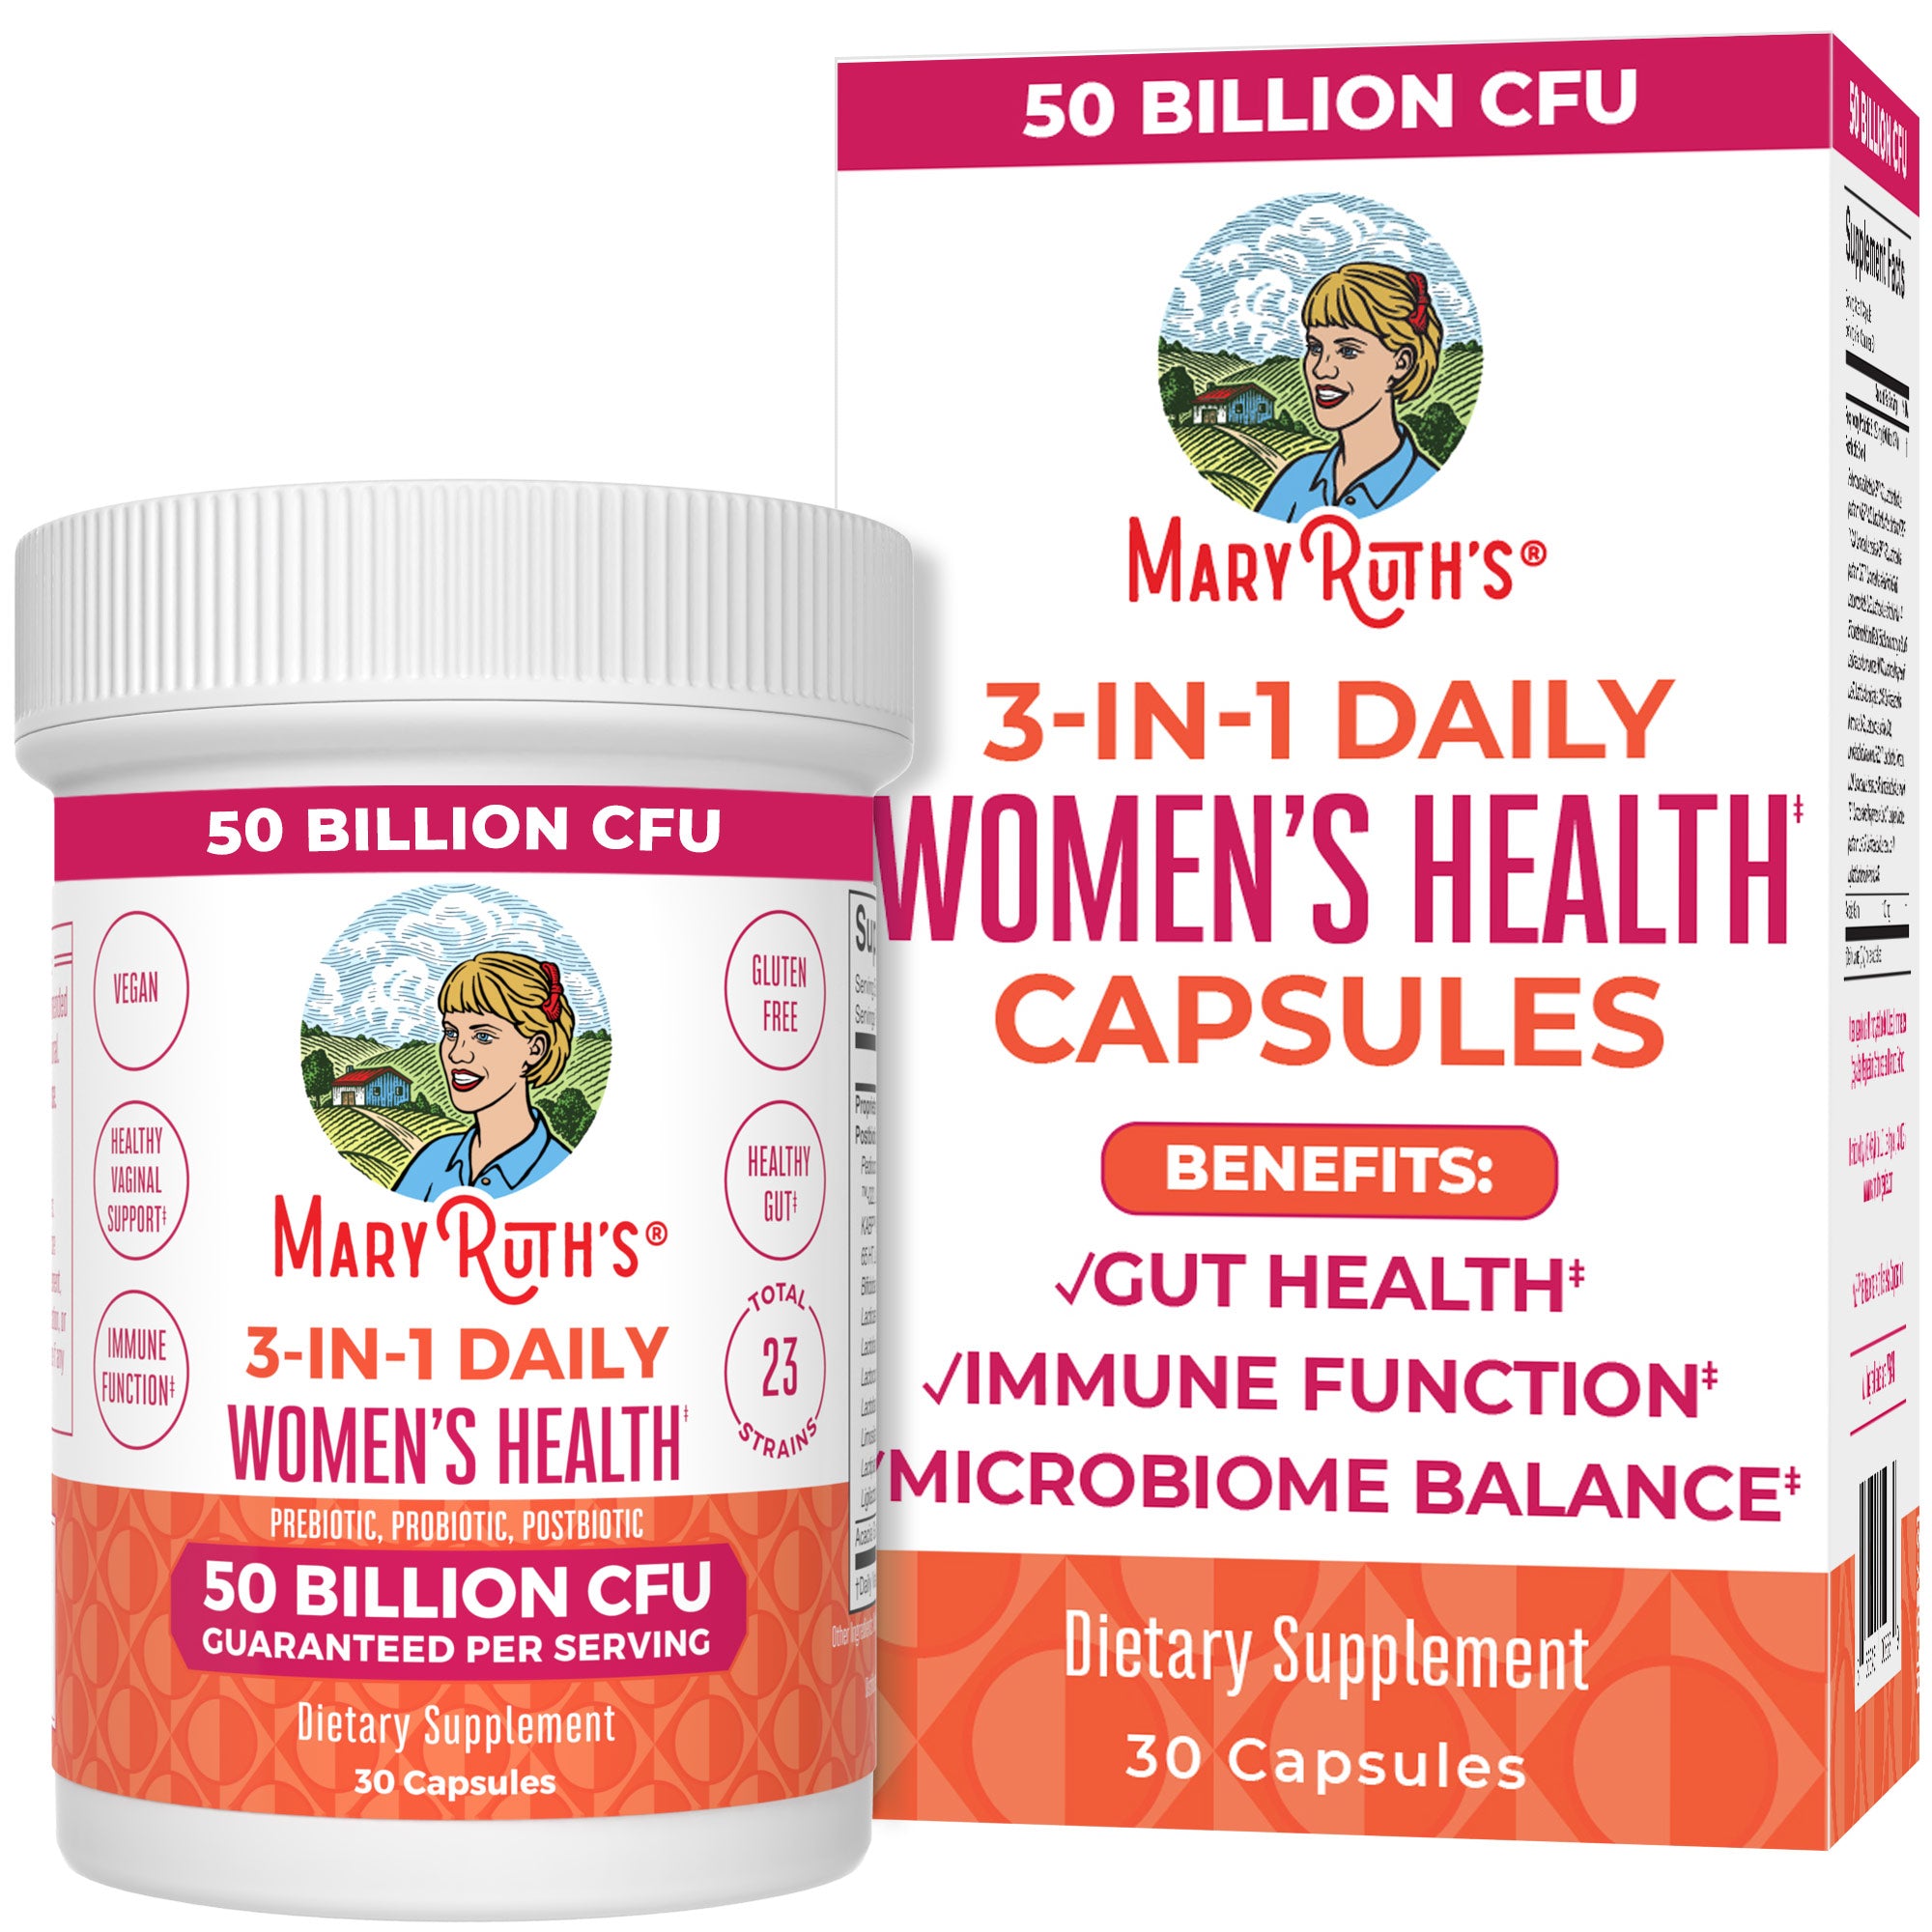 3-in-1 Women's Daily Health Capsules